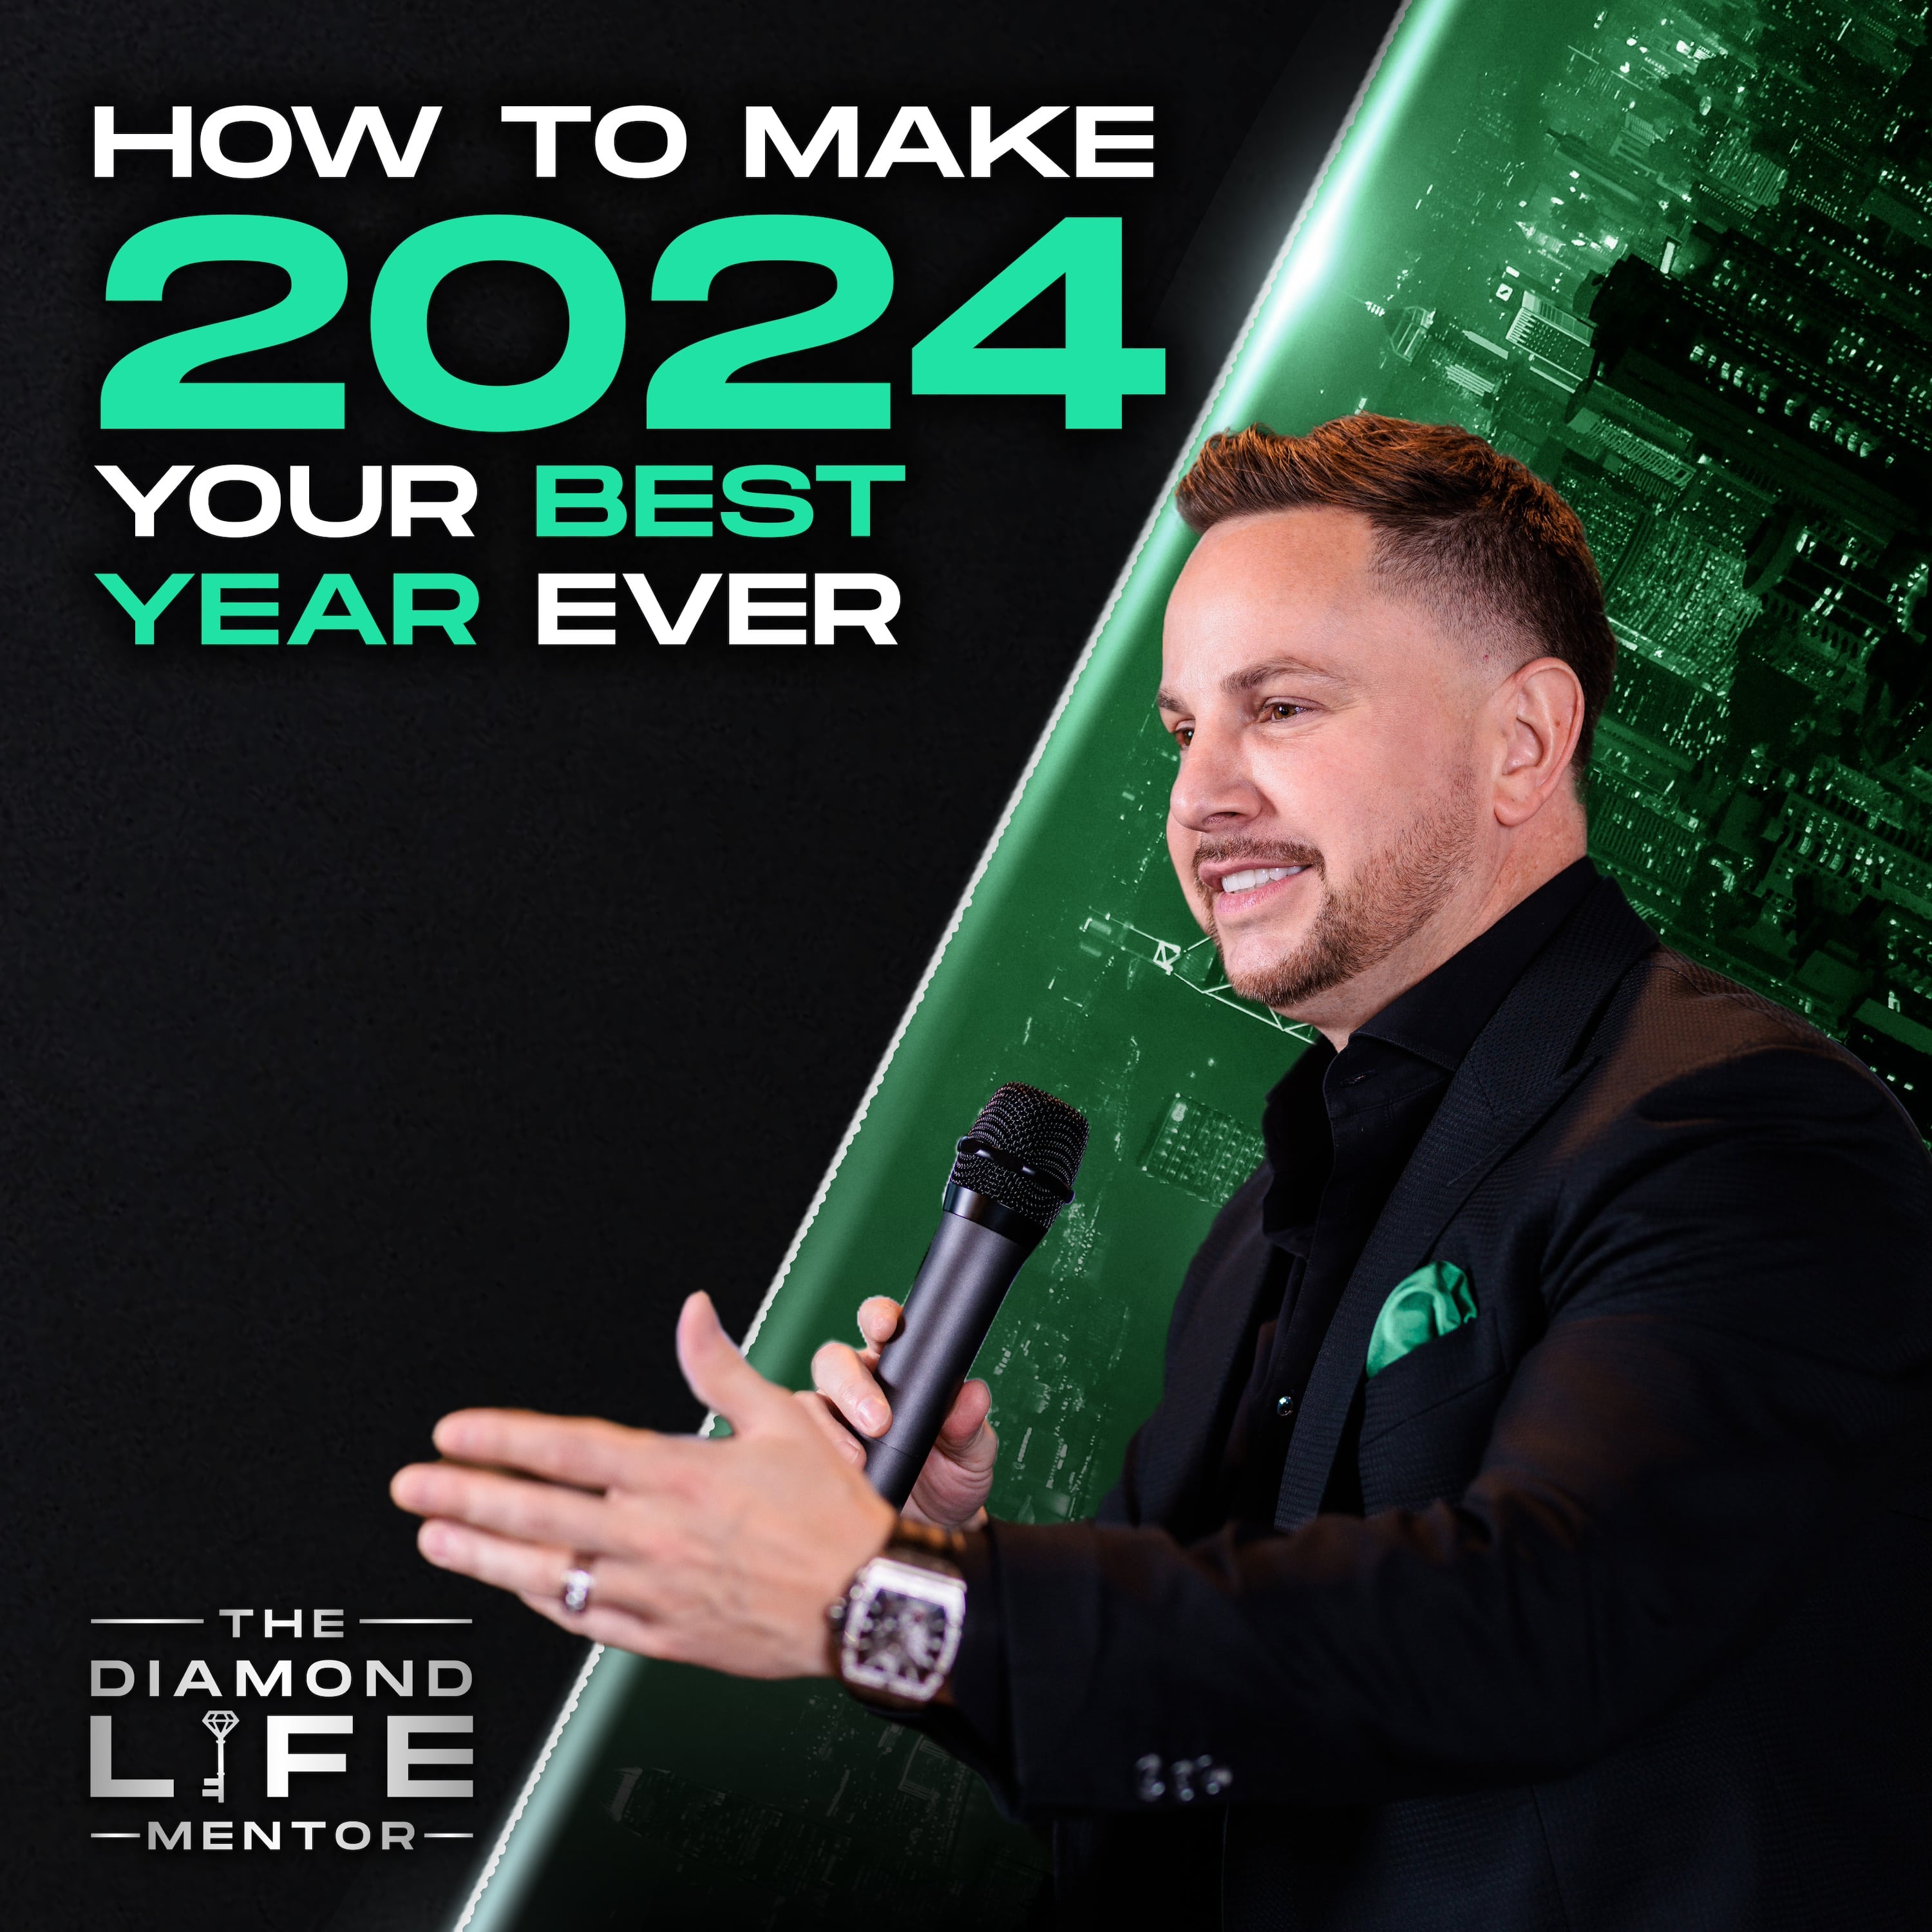 How To Make 2024 Your Best Year Ever